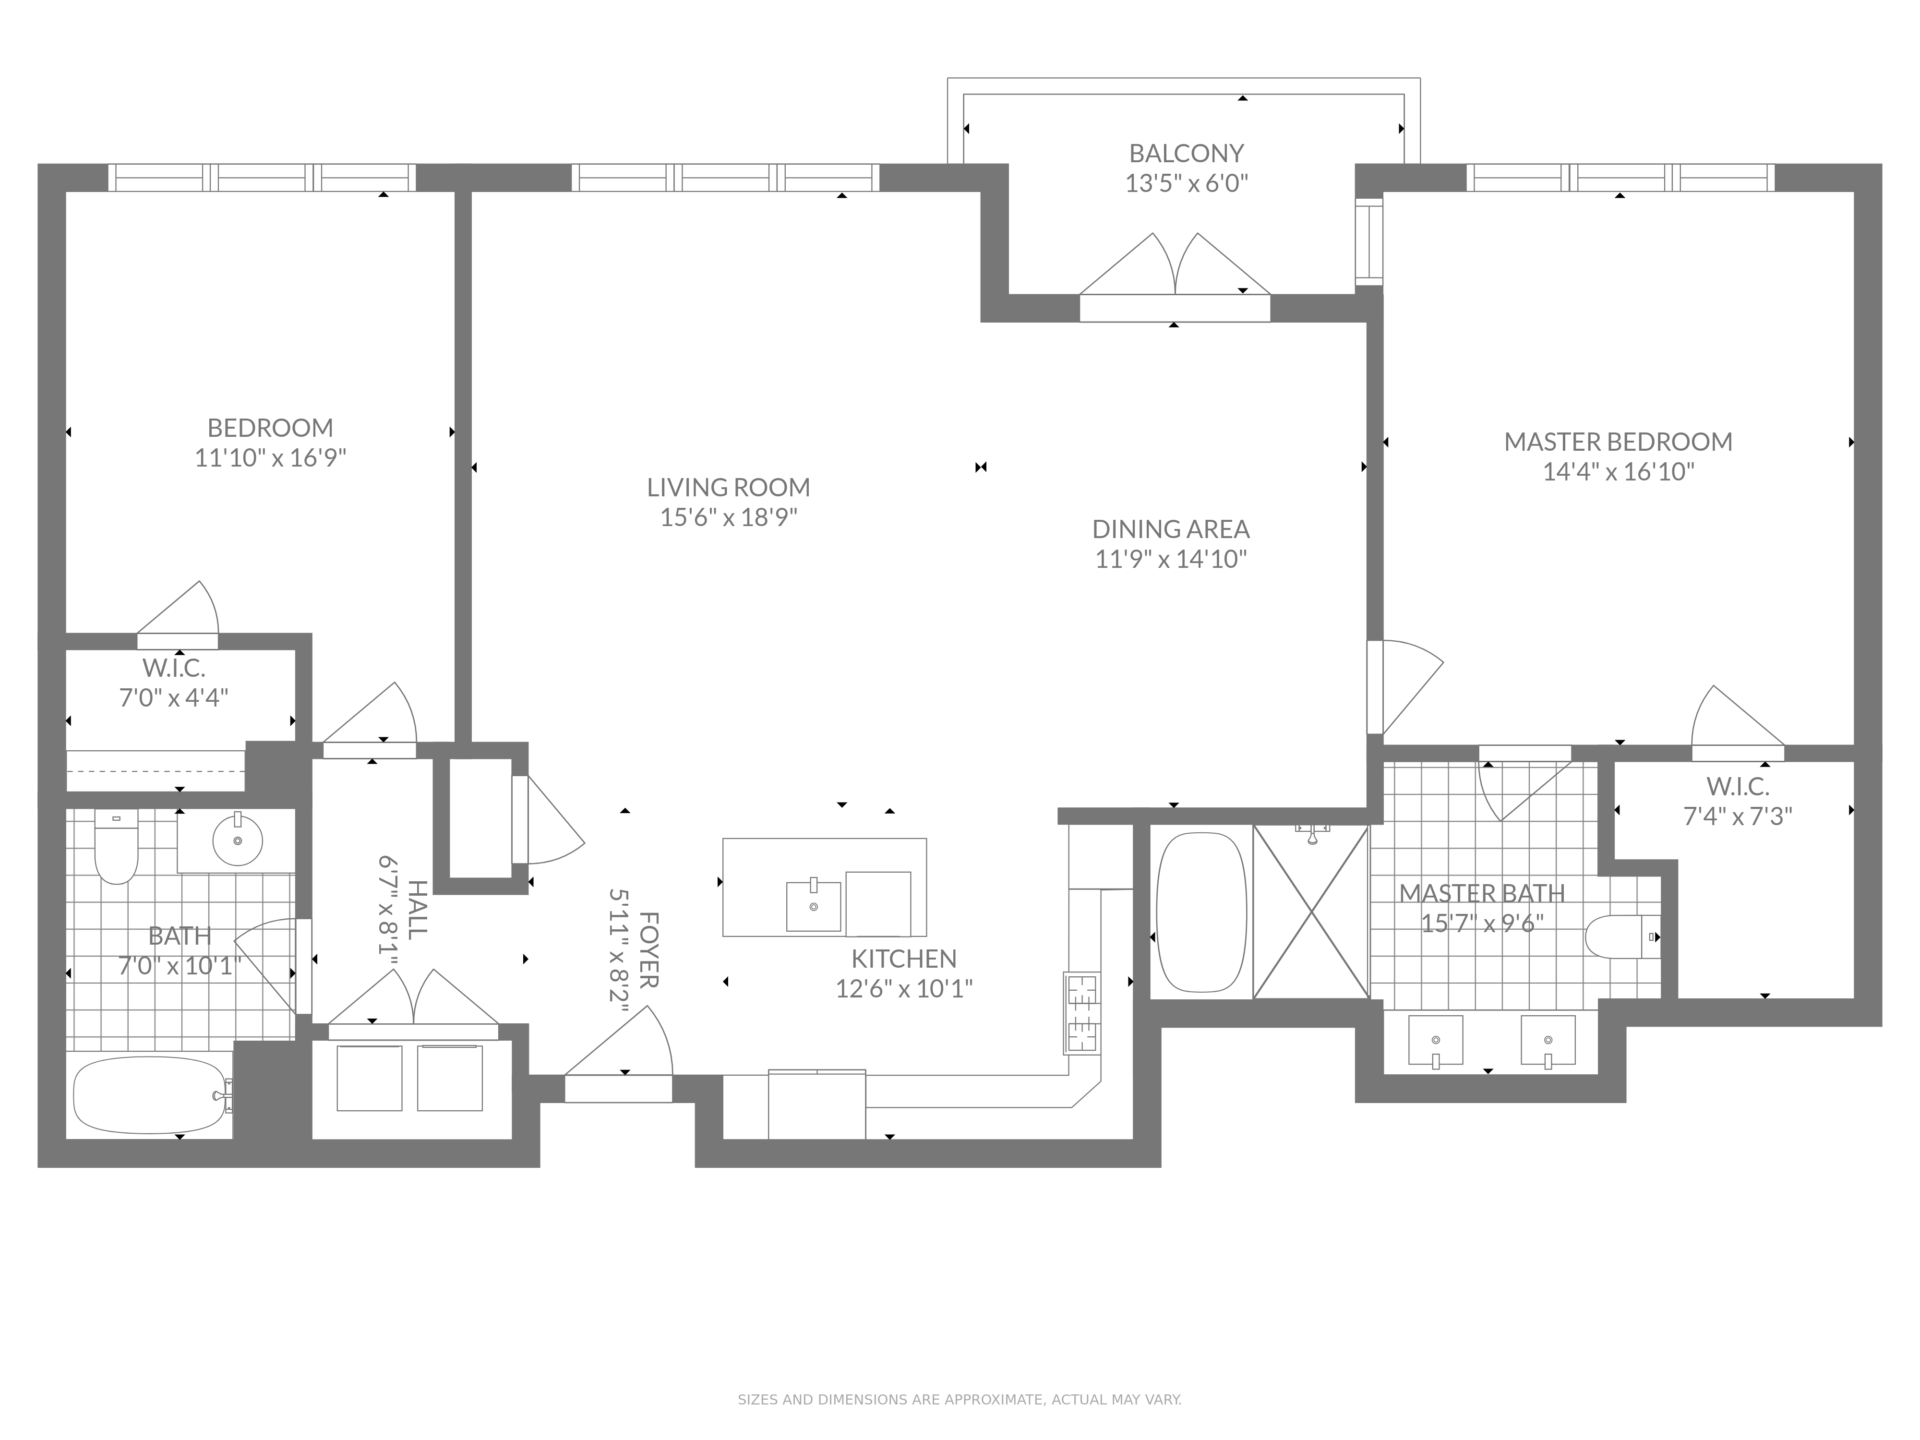 Example floor plan as a real estate photography service